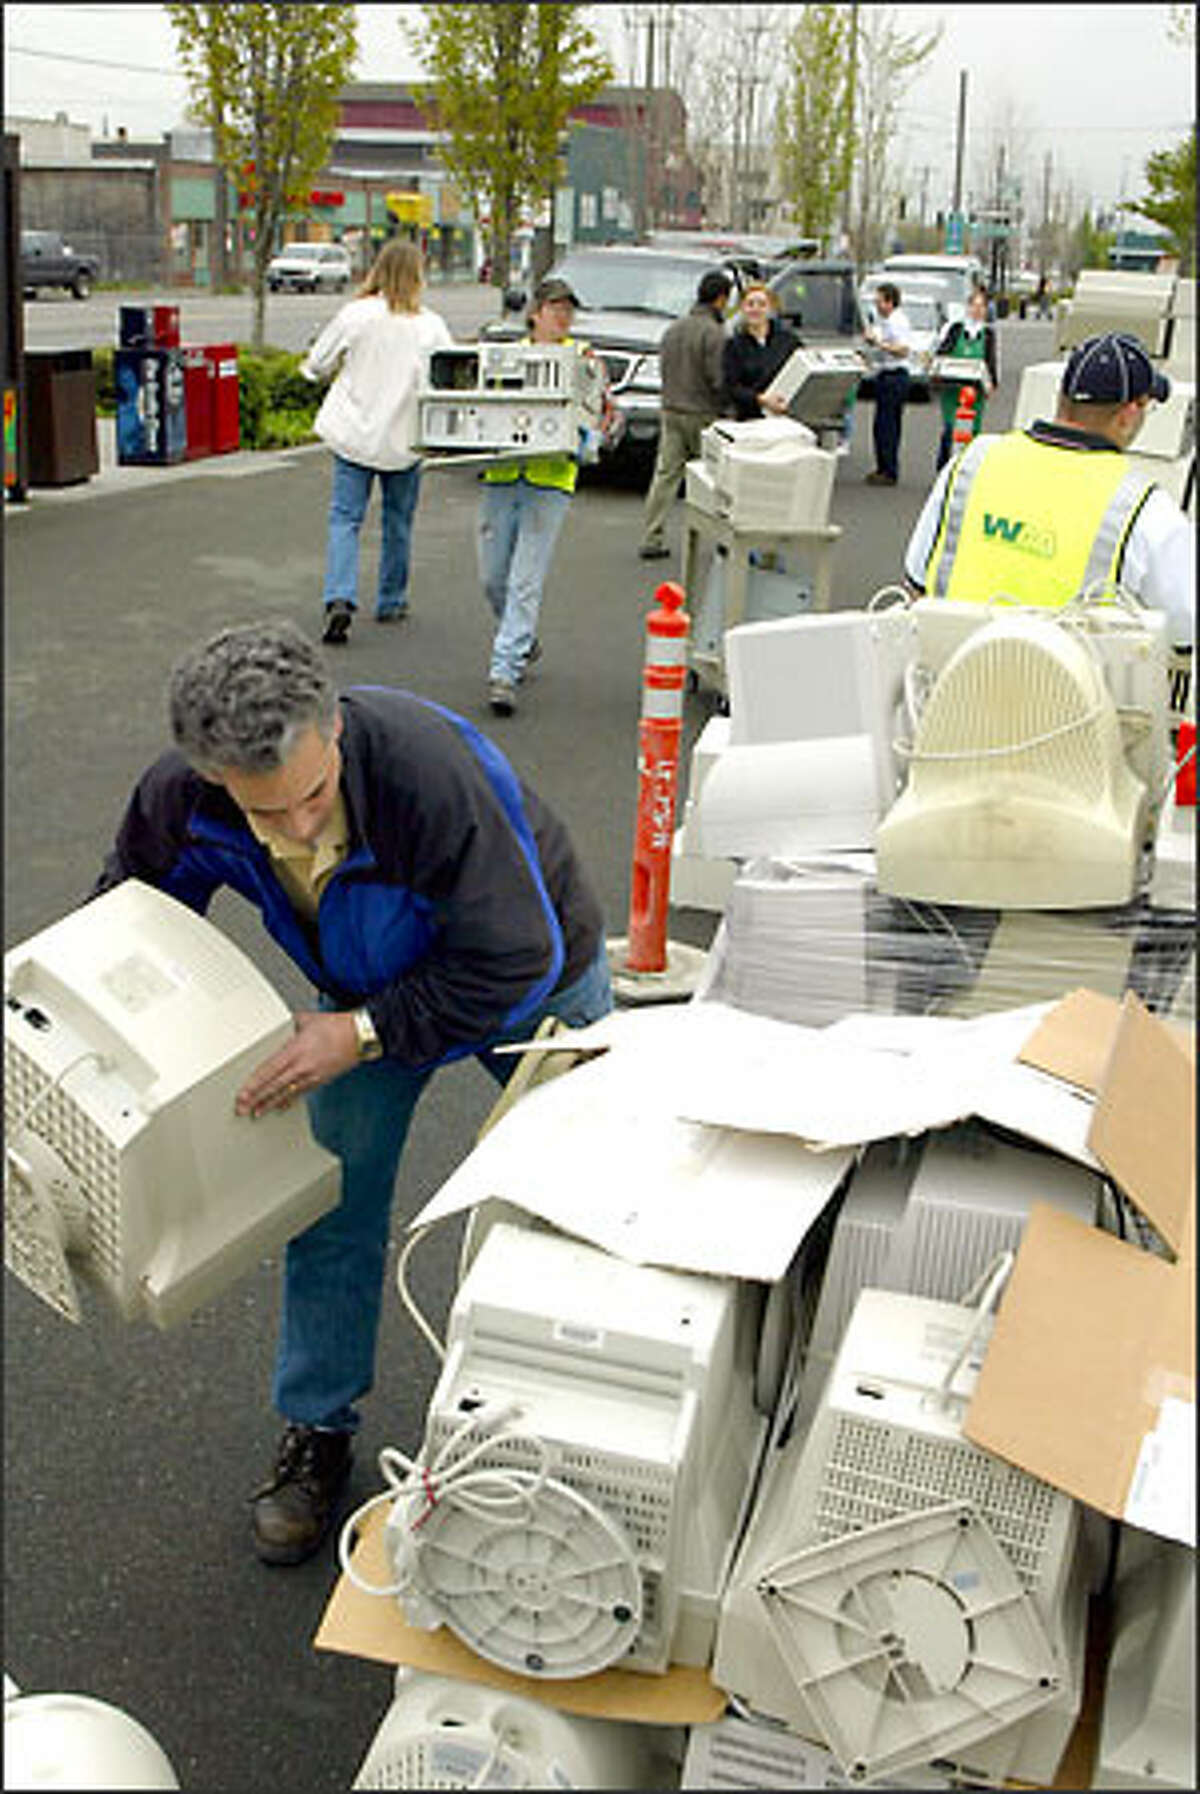 Workers collected computer equipment – four semi-trailers worth – during an Earth Day recycling event at Starbucks headquarters in Seattle. The monitors, central processing units and other computer equipment will be transported to Hewlett Packard’s recycling facility in Roseville, Calif. A similar event will take place this weekend in New York City.